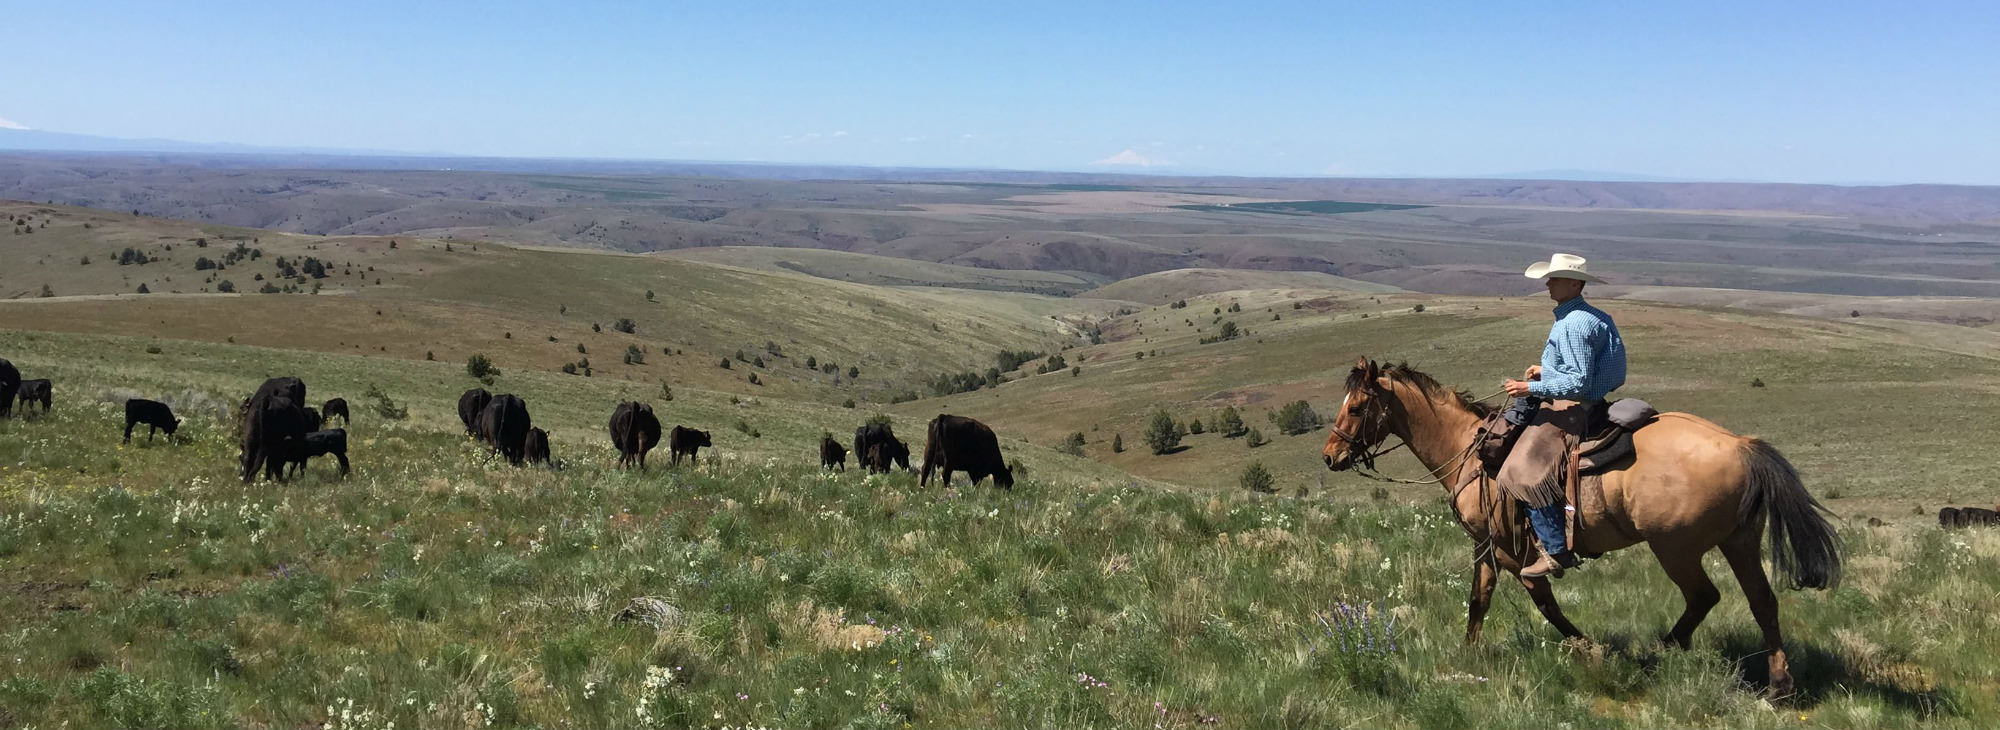 Saddle Up for Cowboy Adventures in the John Day River Territory - Travel  Oregon